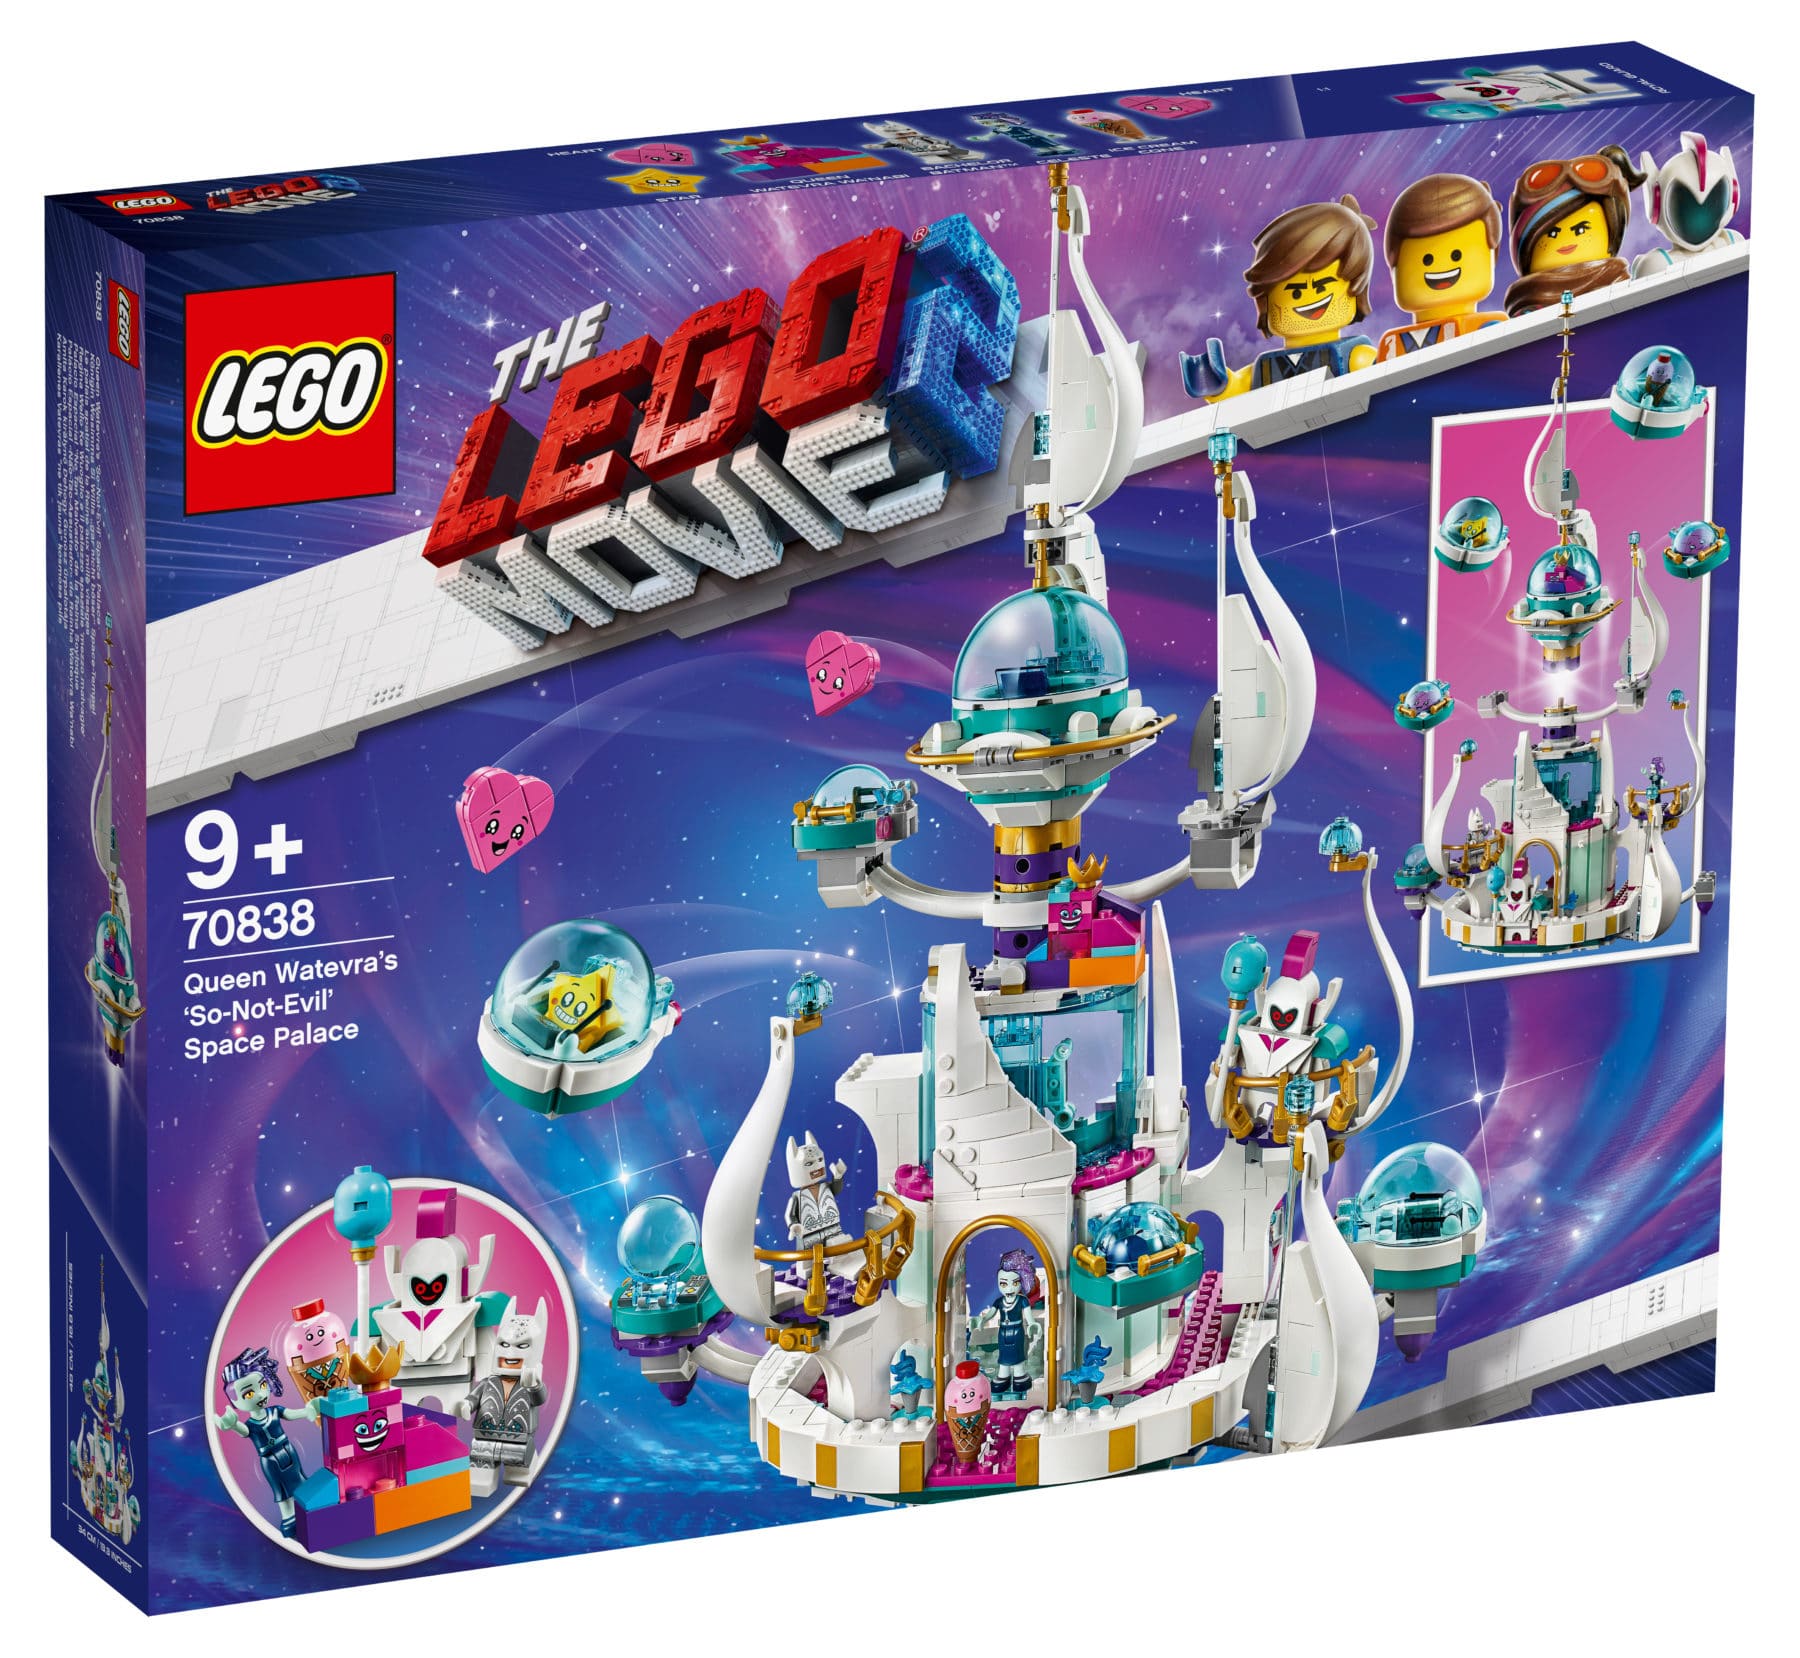 LEGO 70838 Queen Watevra's ‘So-Not-Evil' Space Palace